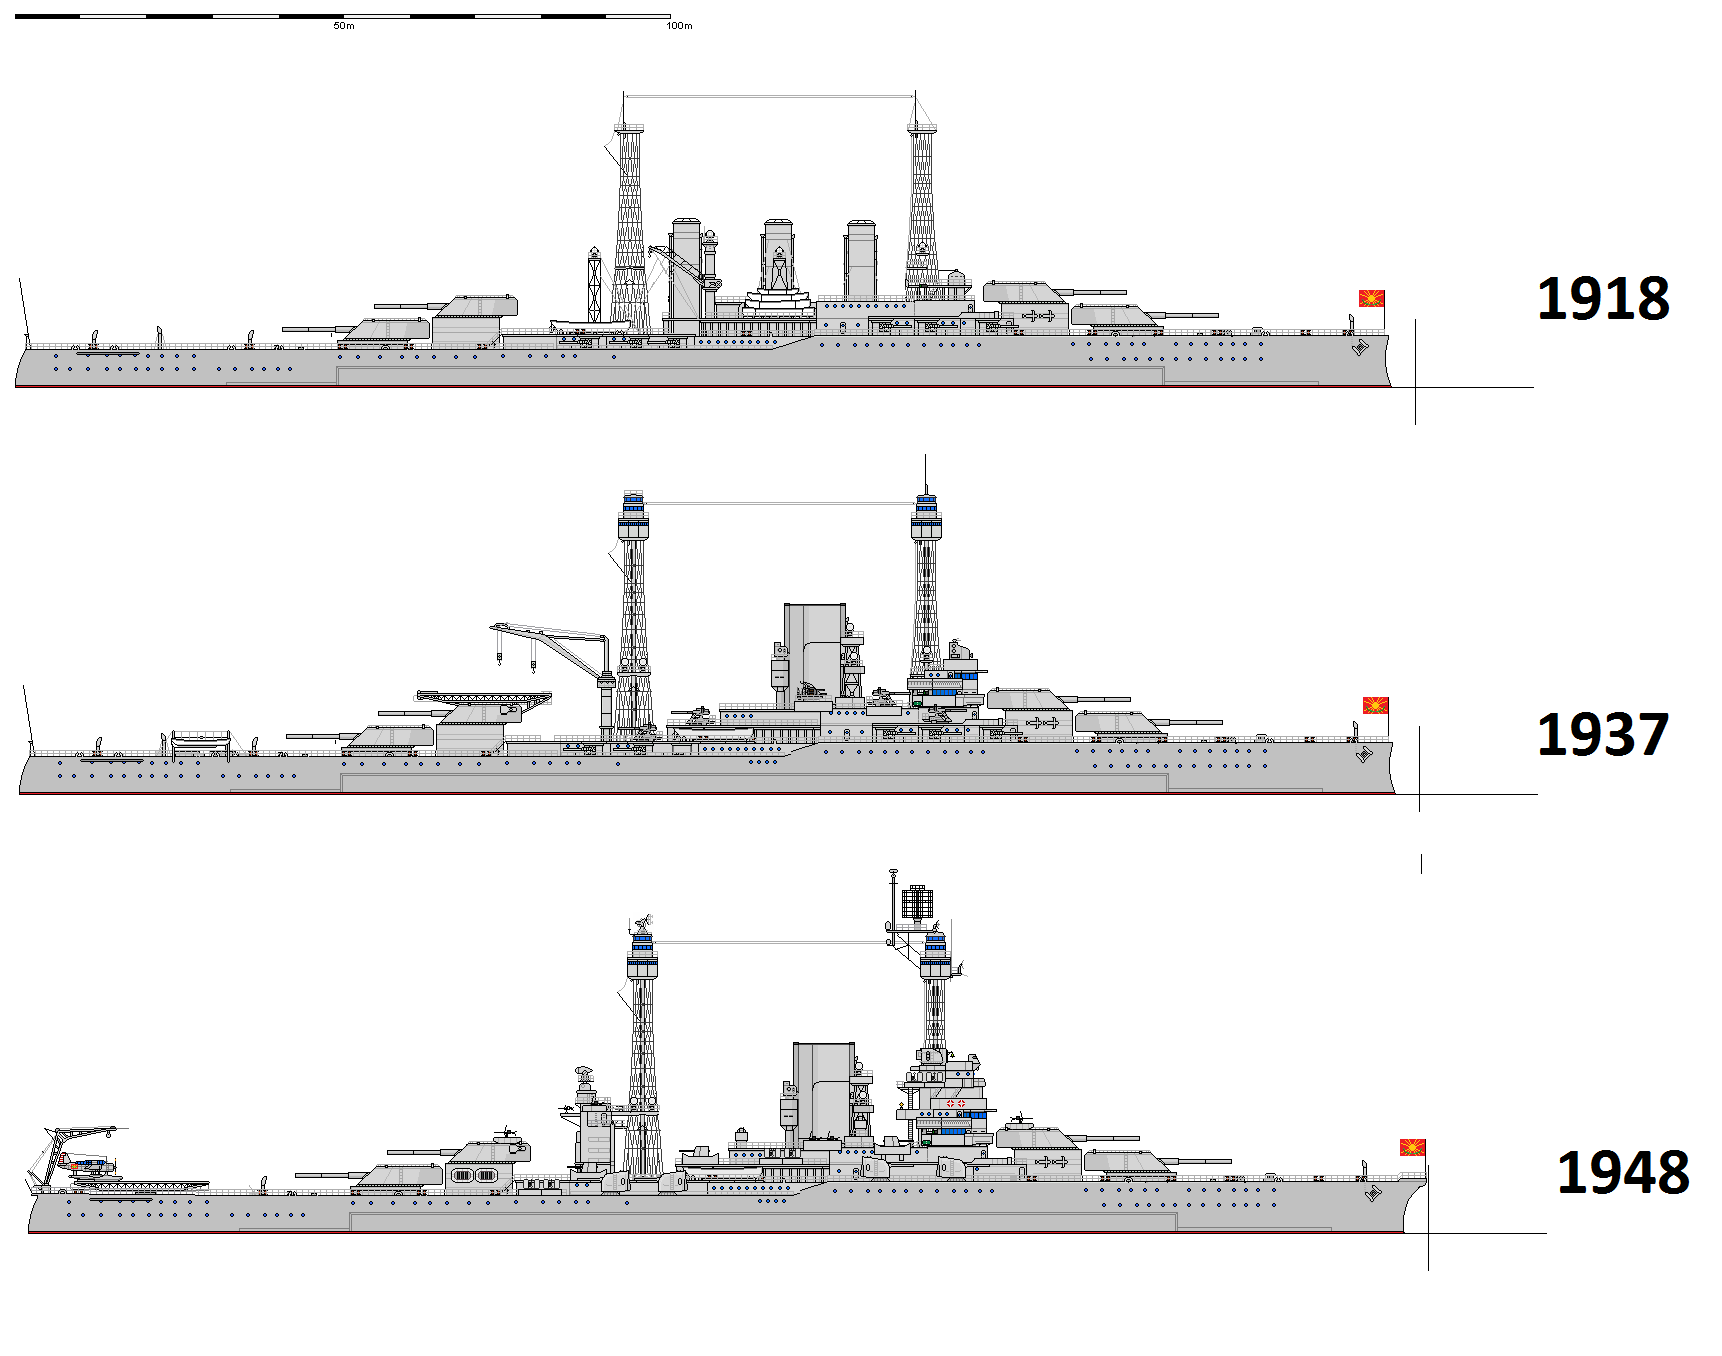 http://images3.wikia.nocookie.net/__cb20121209072454/althistory/ru/images/b/b6/Confederacy_battlecruiser.png